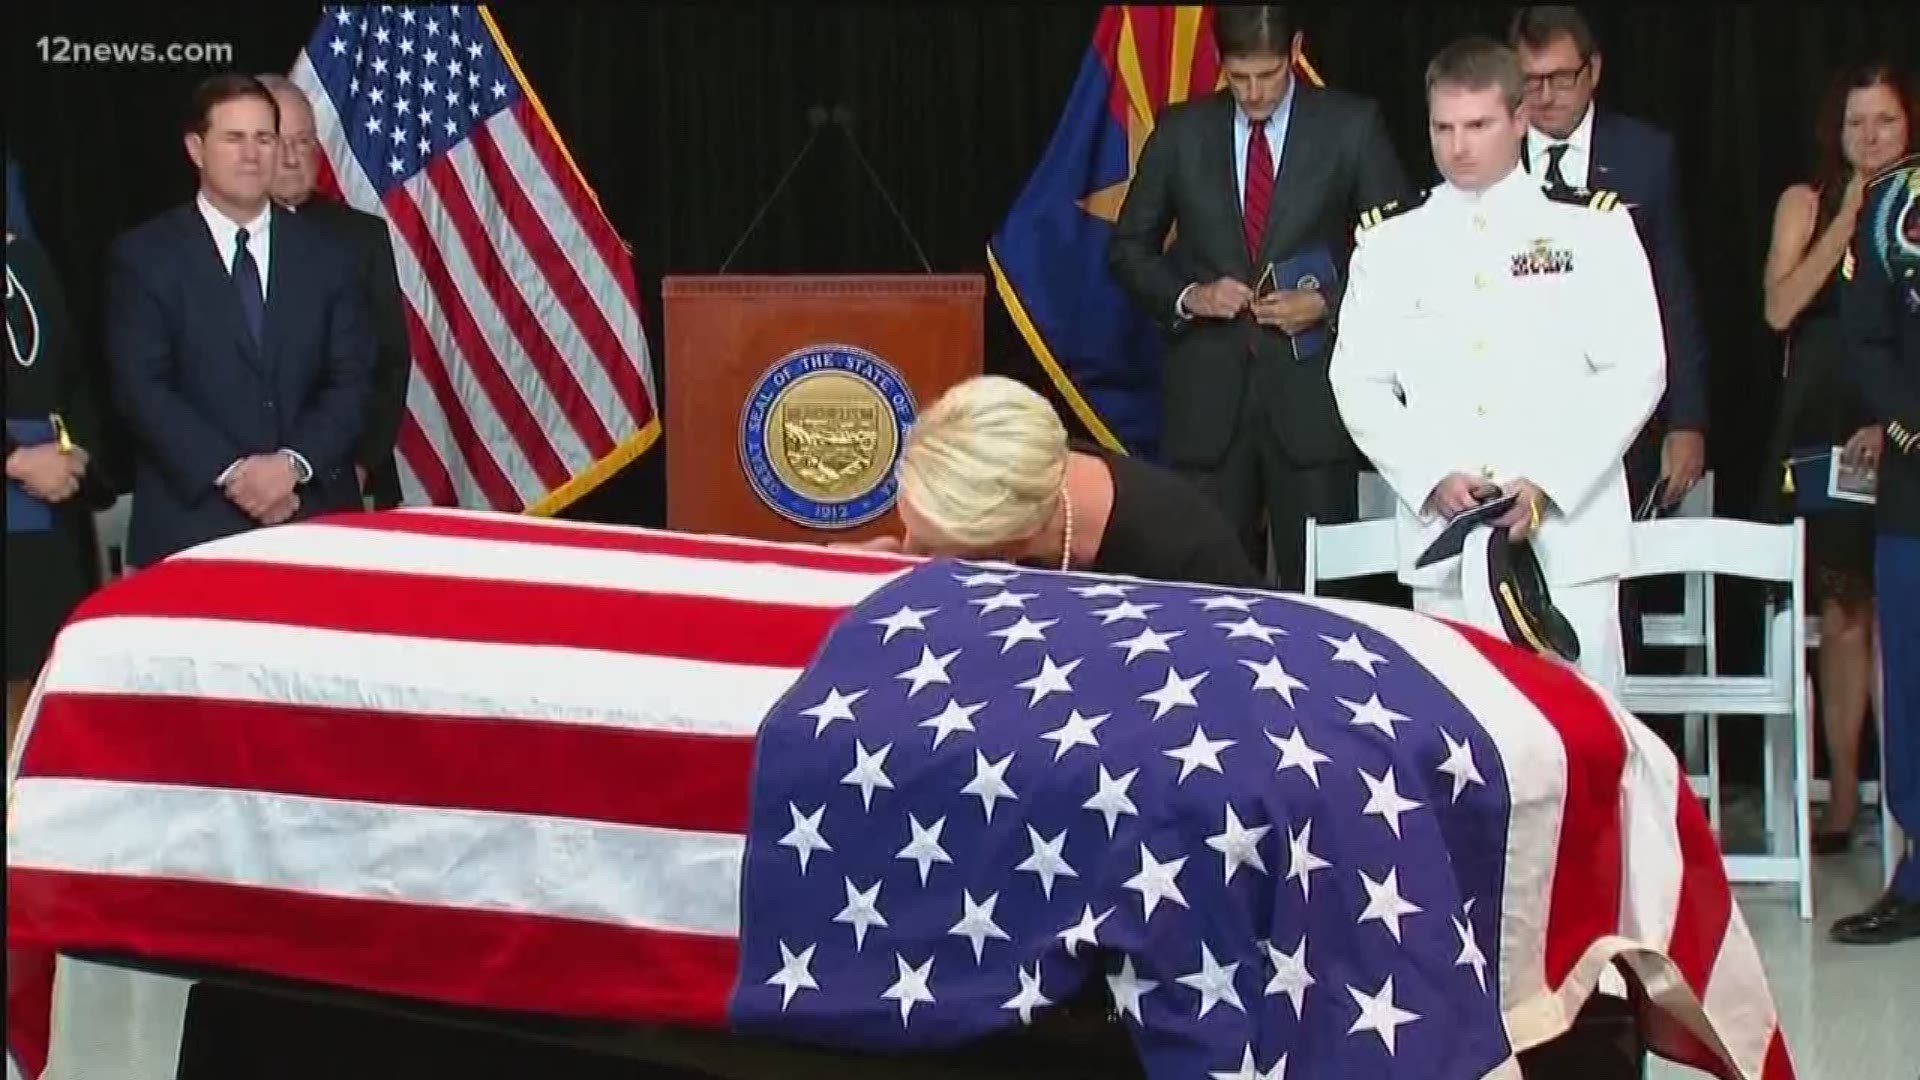 The McCain family says their goodbyes, leaving in peace and comforting one another.